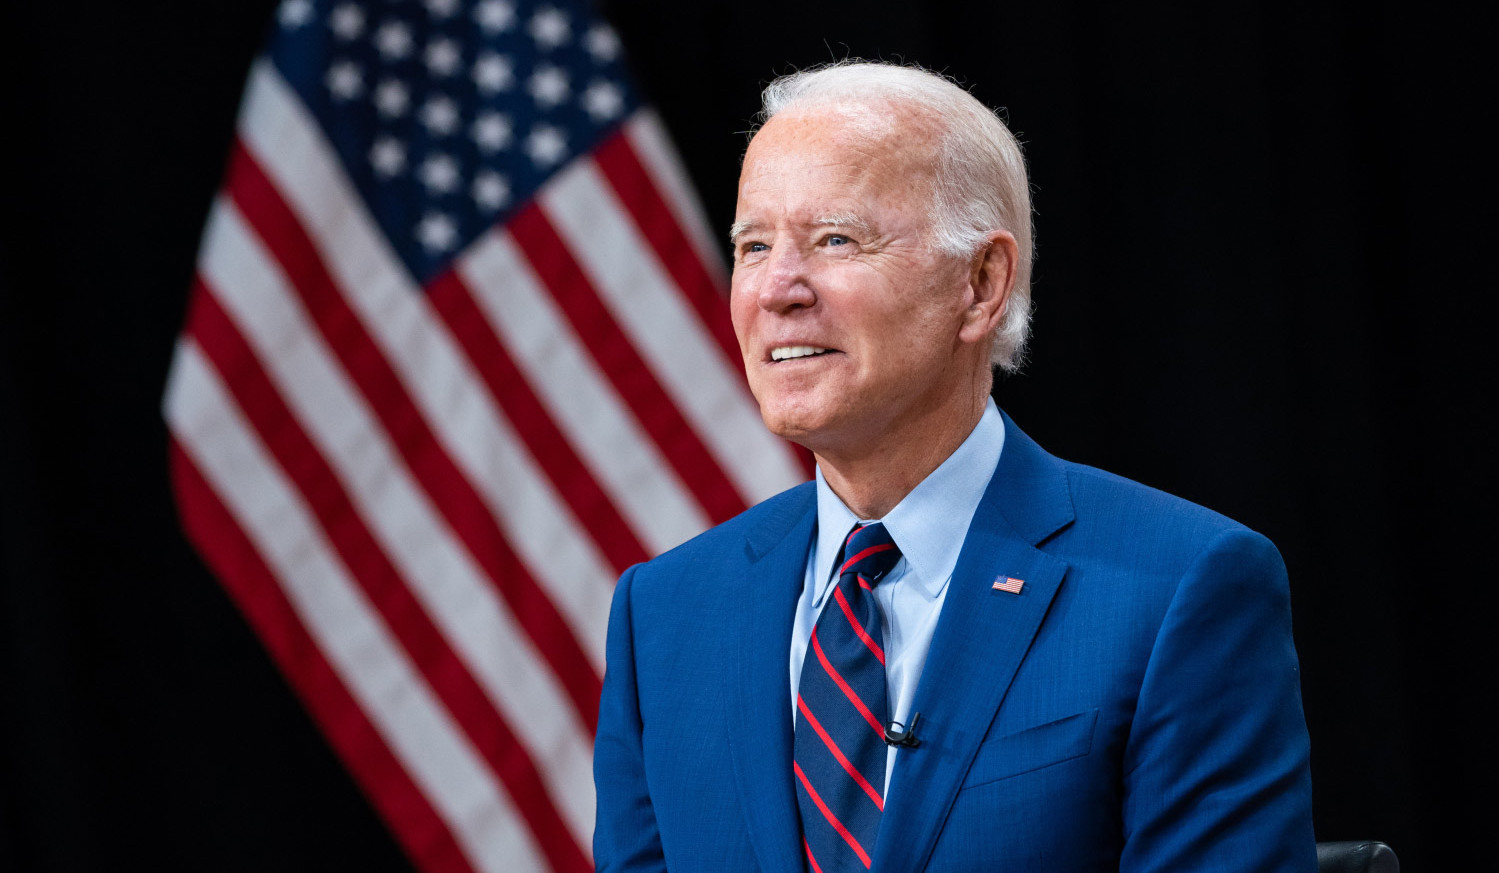 Biden asked Congress to loosen visa restrictions on highly educated Russians